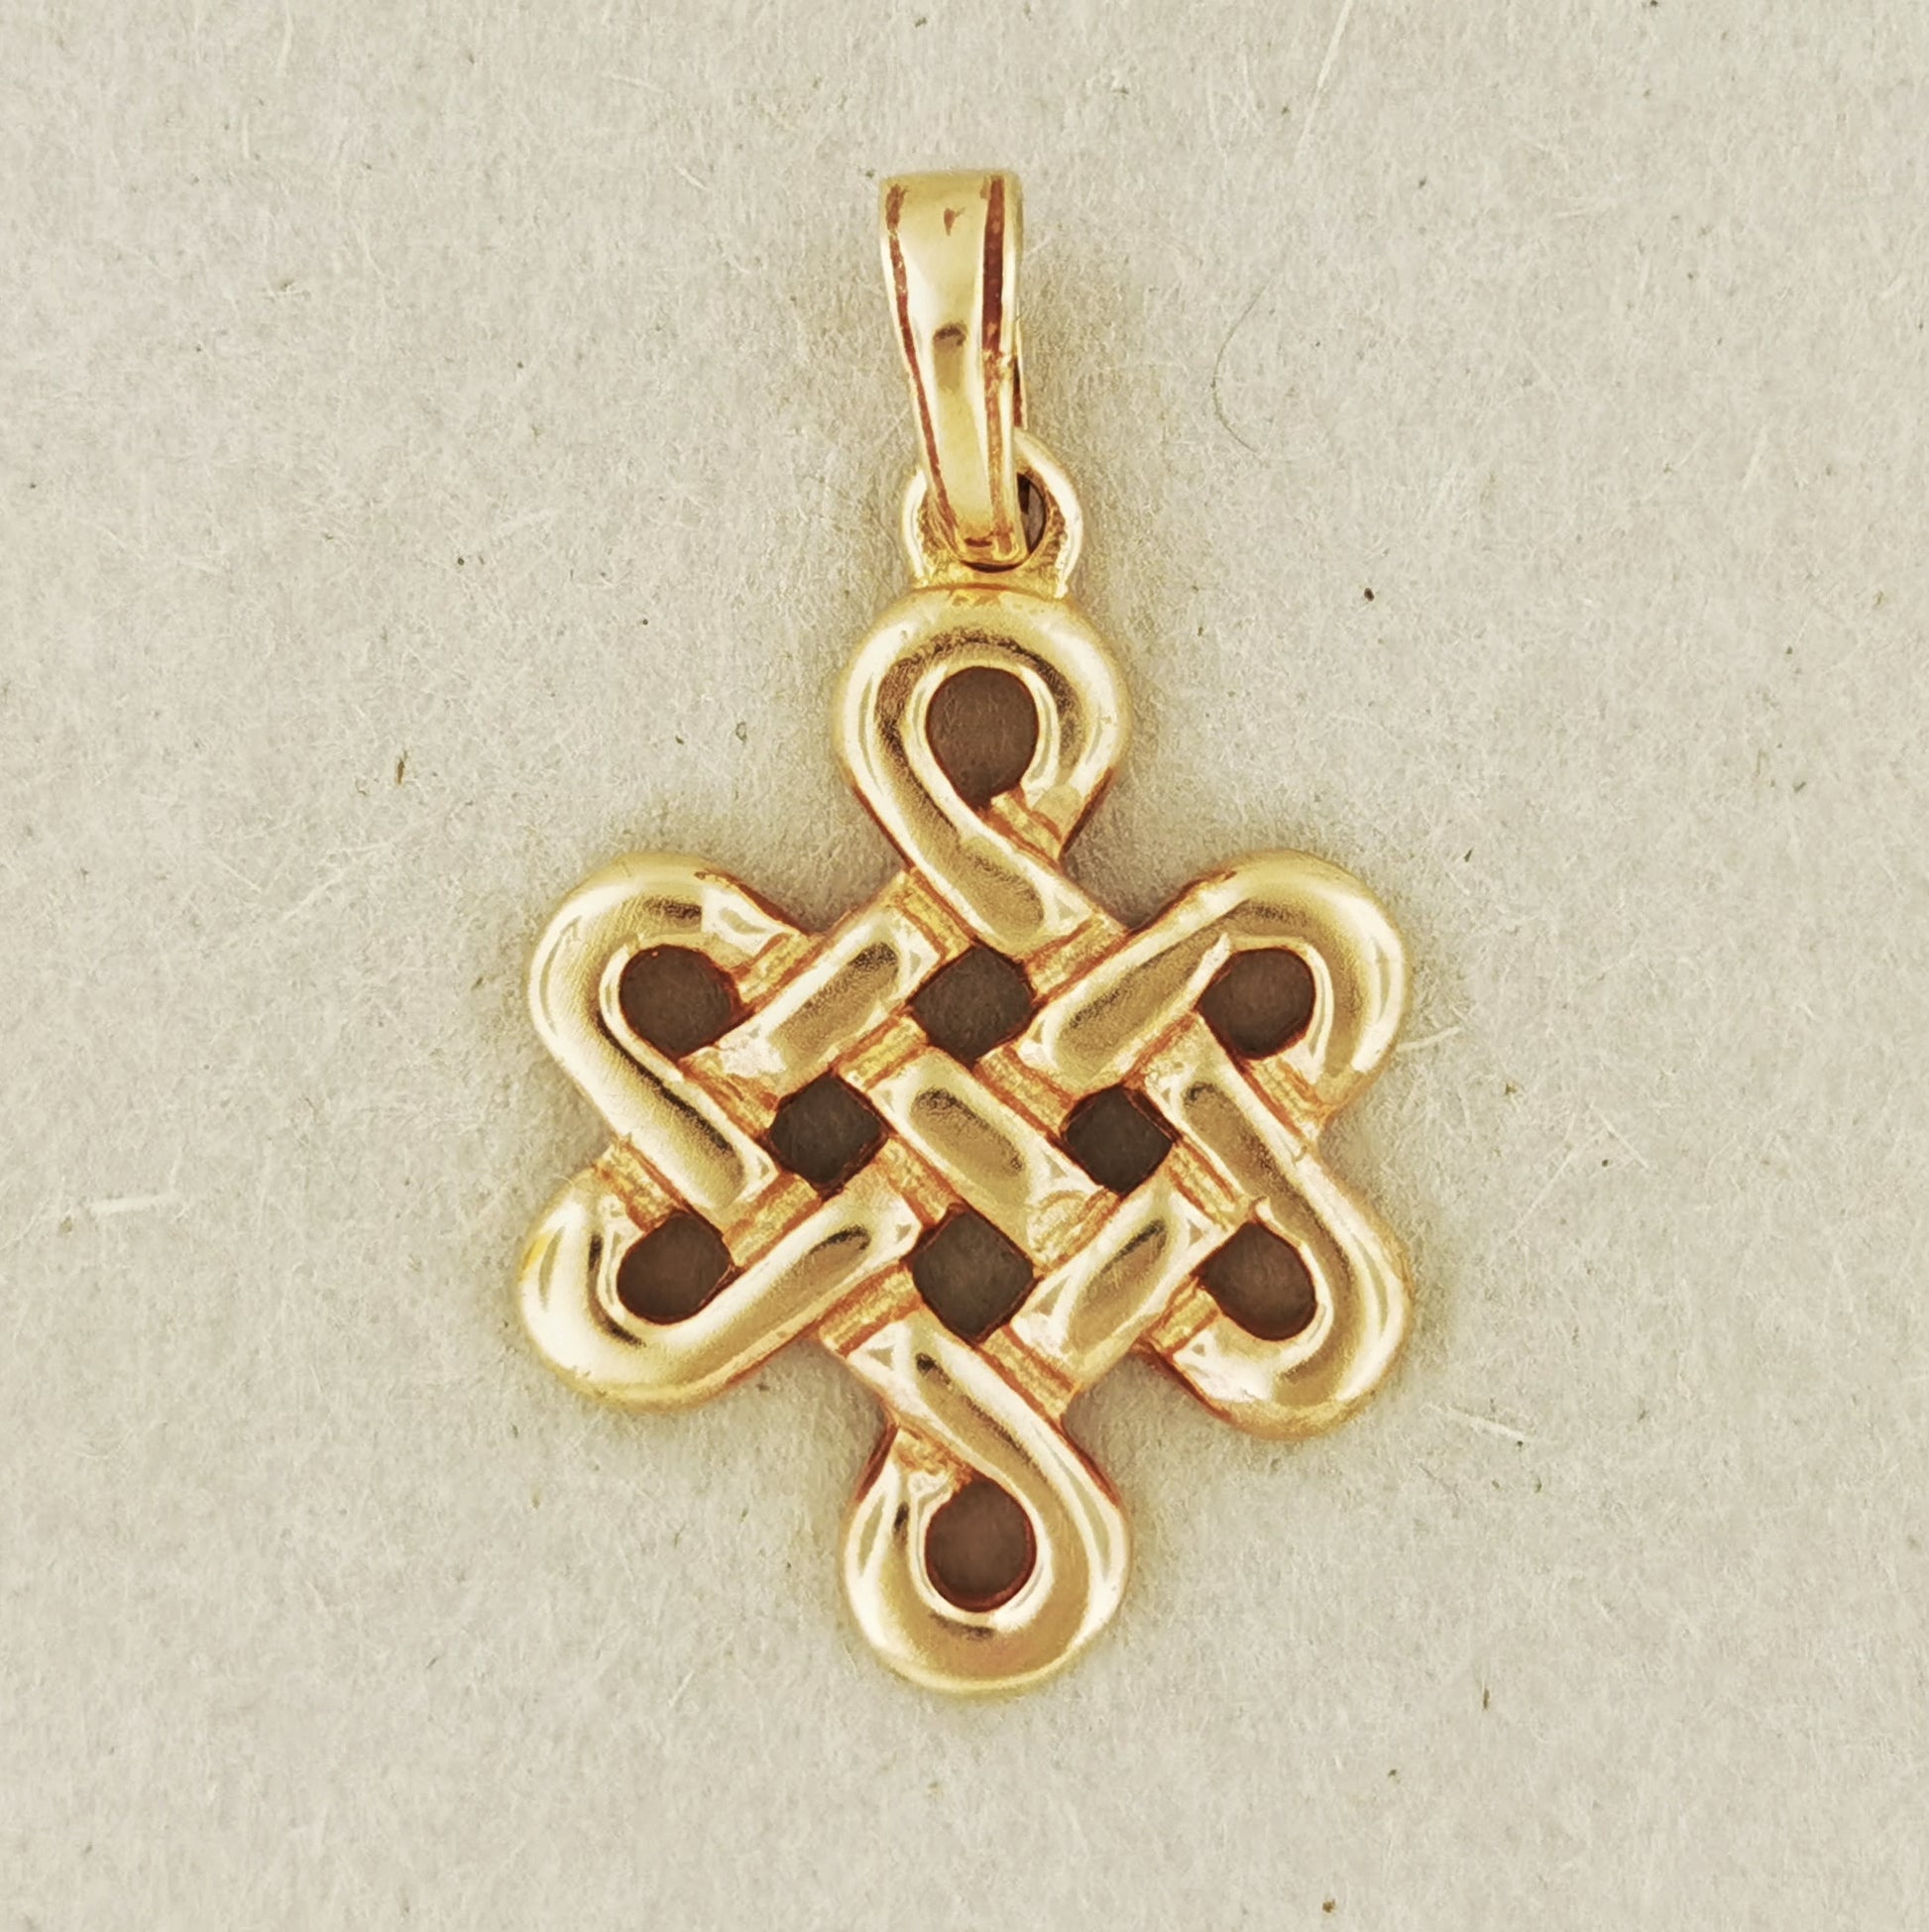 Large Endless Knot Pendant in Sterling Silver or Antique Bronze, Shrivatsa Silver Pendant, Shrivatsa Bronze Pendant, Silver Celtic Jewelry, Silver Celtic Jewellery, Bronze Celtic Jewelry, Bronze Celtic Jewellery, Silver Endless Knot Pendant, Bronze Endless Knot Pendant, Gold Chinese Knot Pendant, Silver Iirsh Jewelry, Silver Irish Jewellery, Asian Knot Pendant